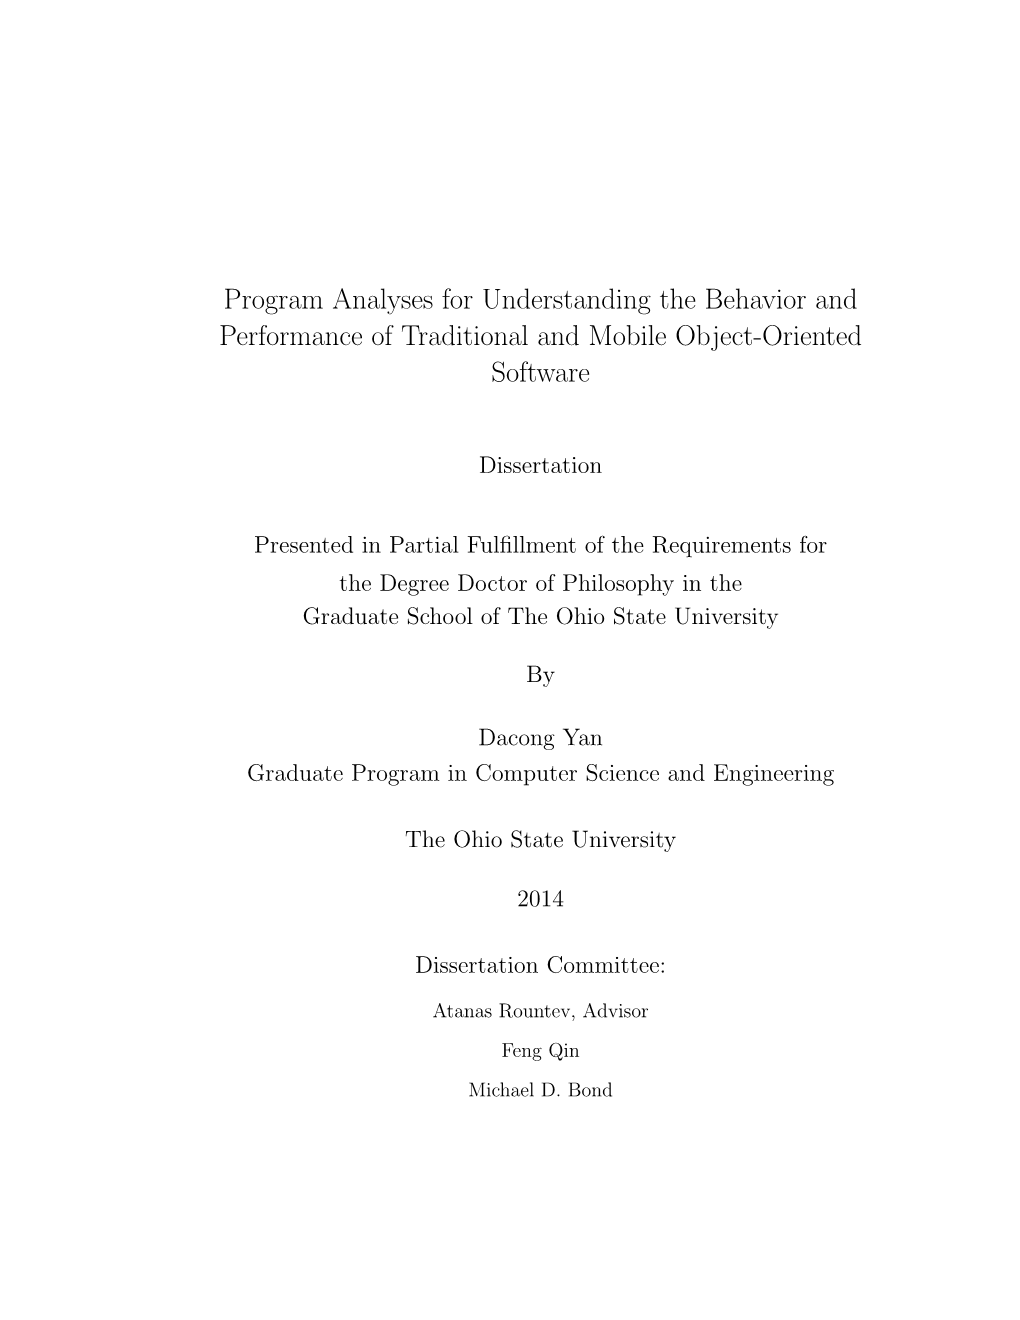 Program Analyses for Understanding the Behavior and Performance of Traditional and Mobile Object-Oriented Software